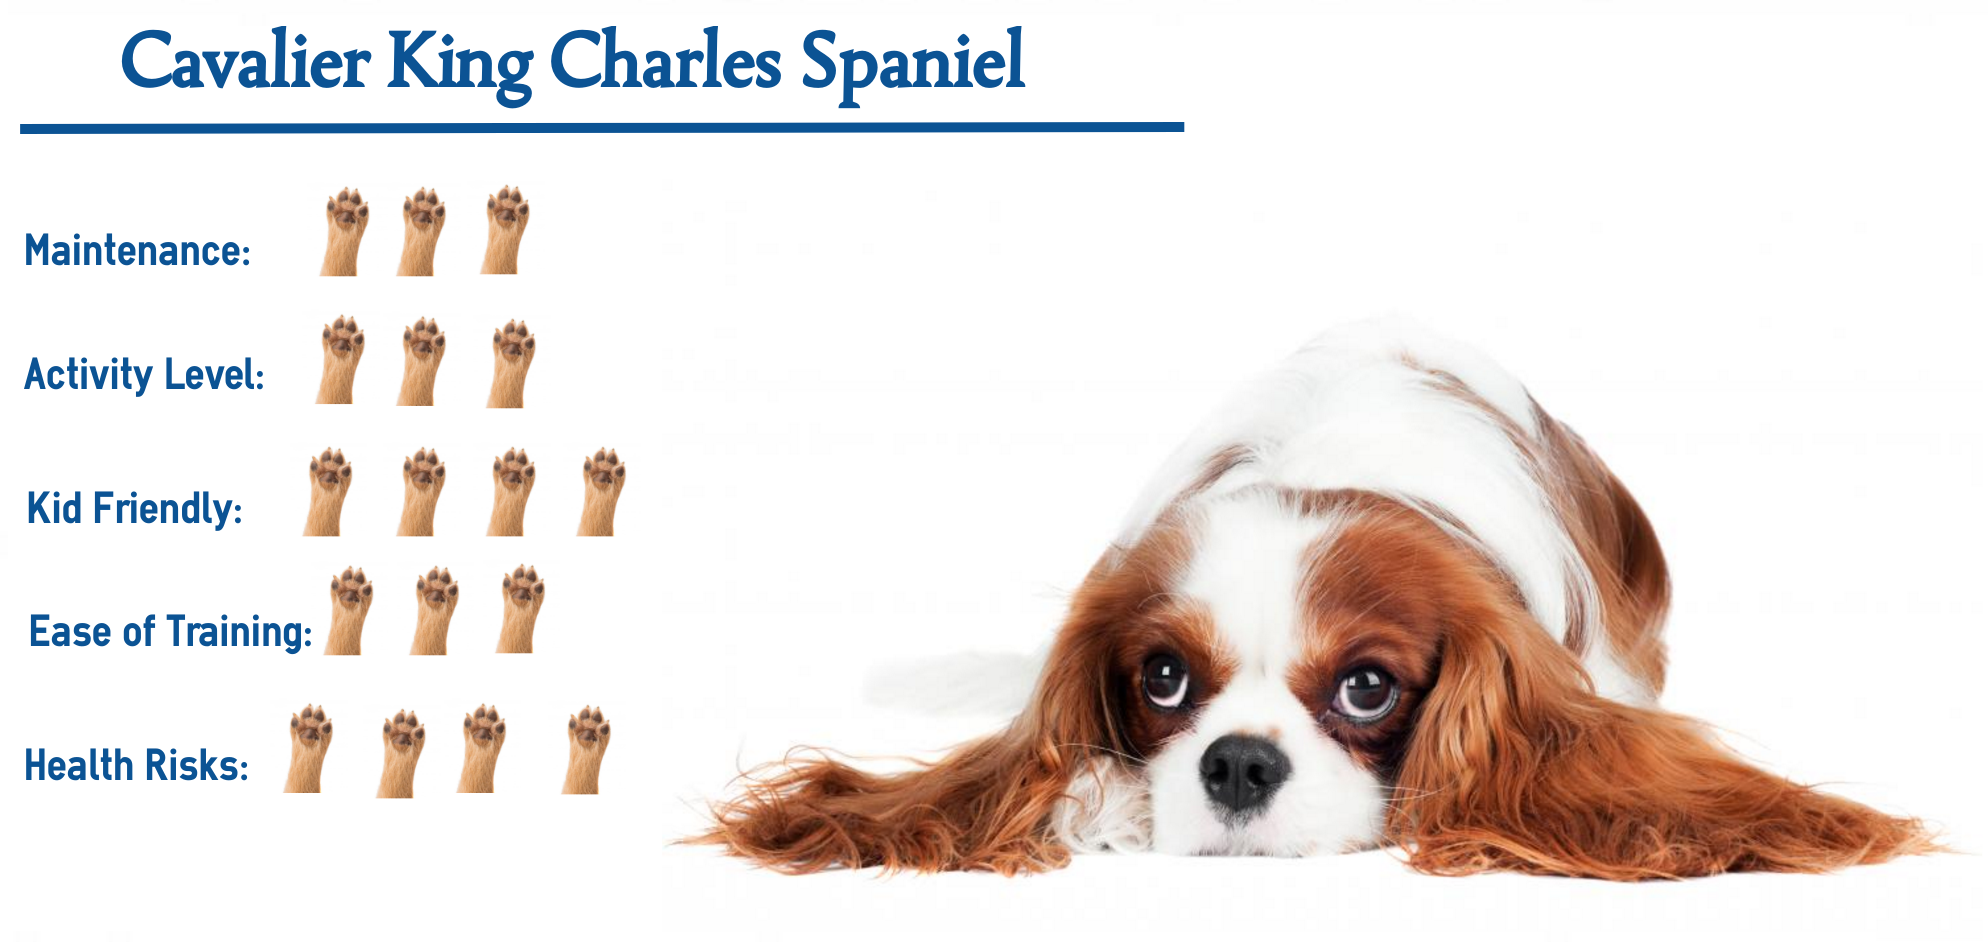 Cavalier King Charles Spaniel Everything You Need To Know At A